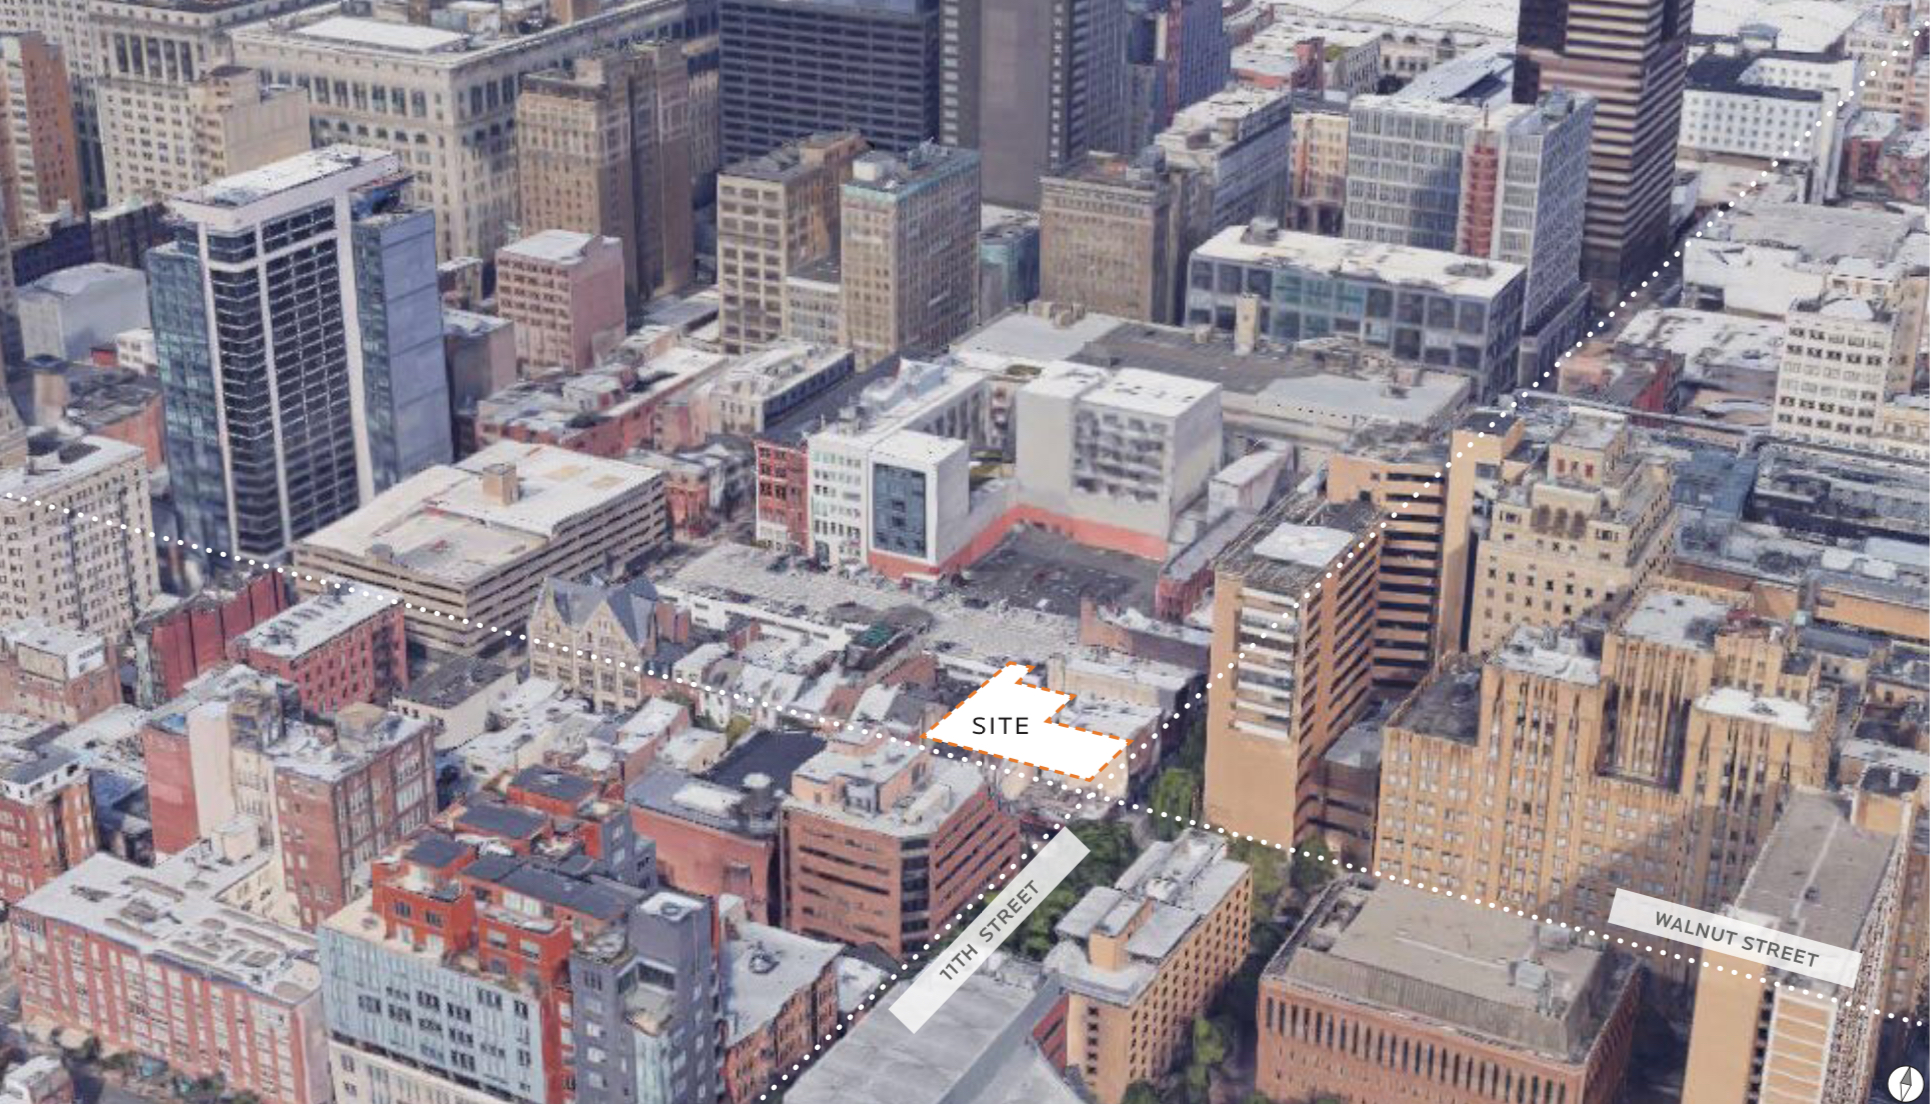 Aerial view and site plan of of 1101 Walnut Street site. Credit: JKRP Architects